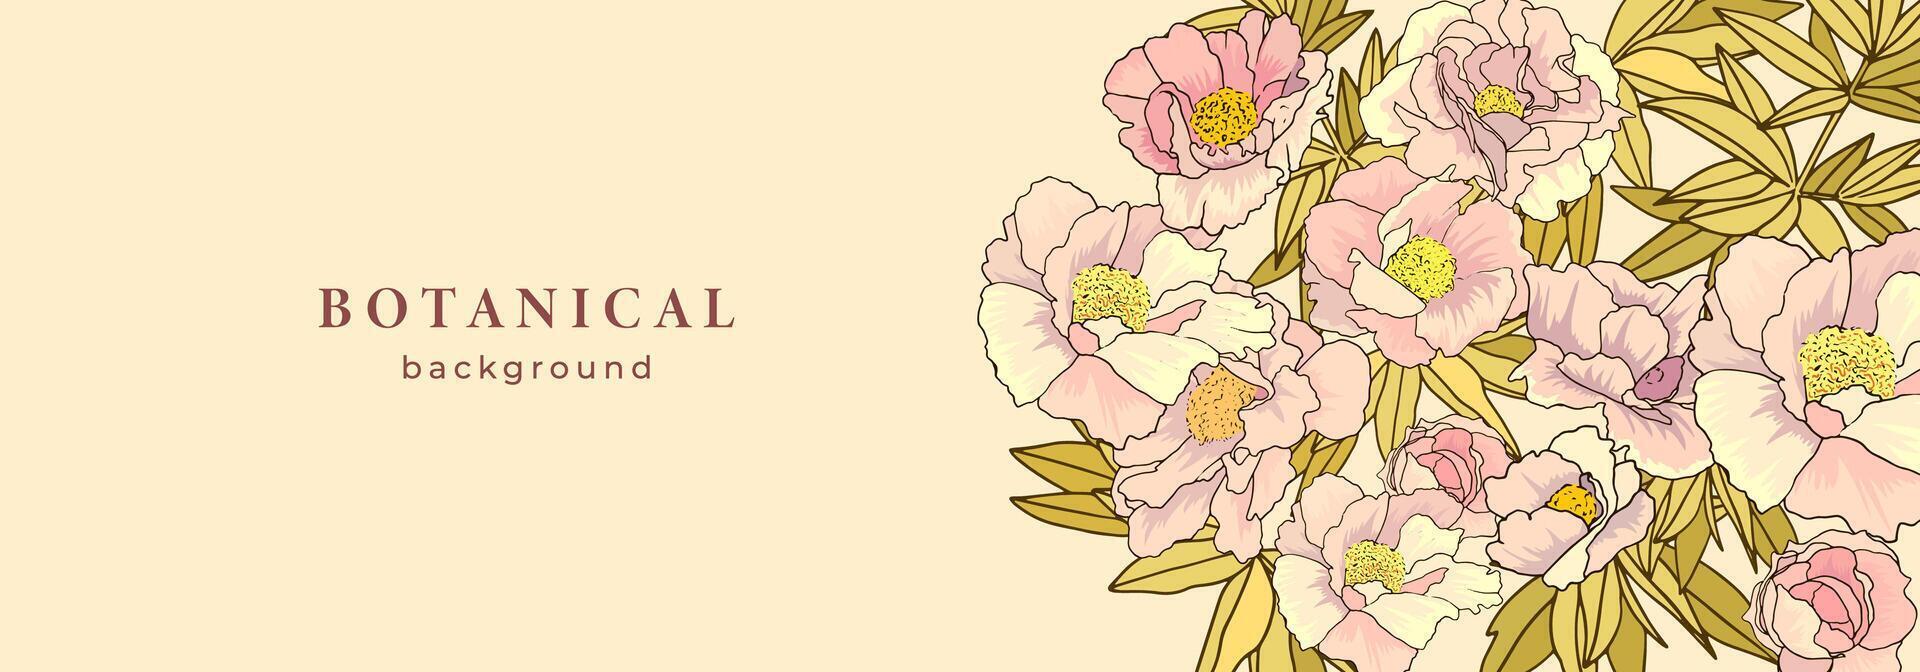 Victorian style vintage botanical background for banner. Template with rose flower, floral pattern. Blooming peony. Spring design with flowering peony tree vector